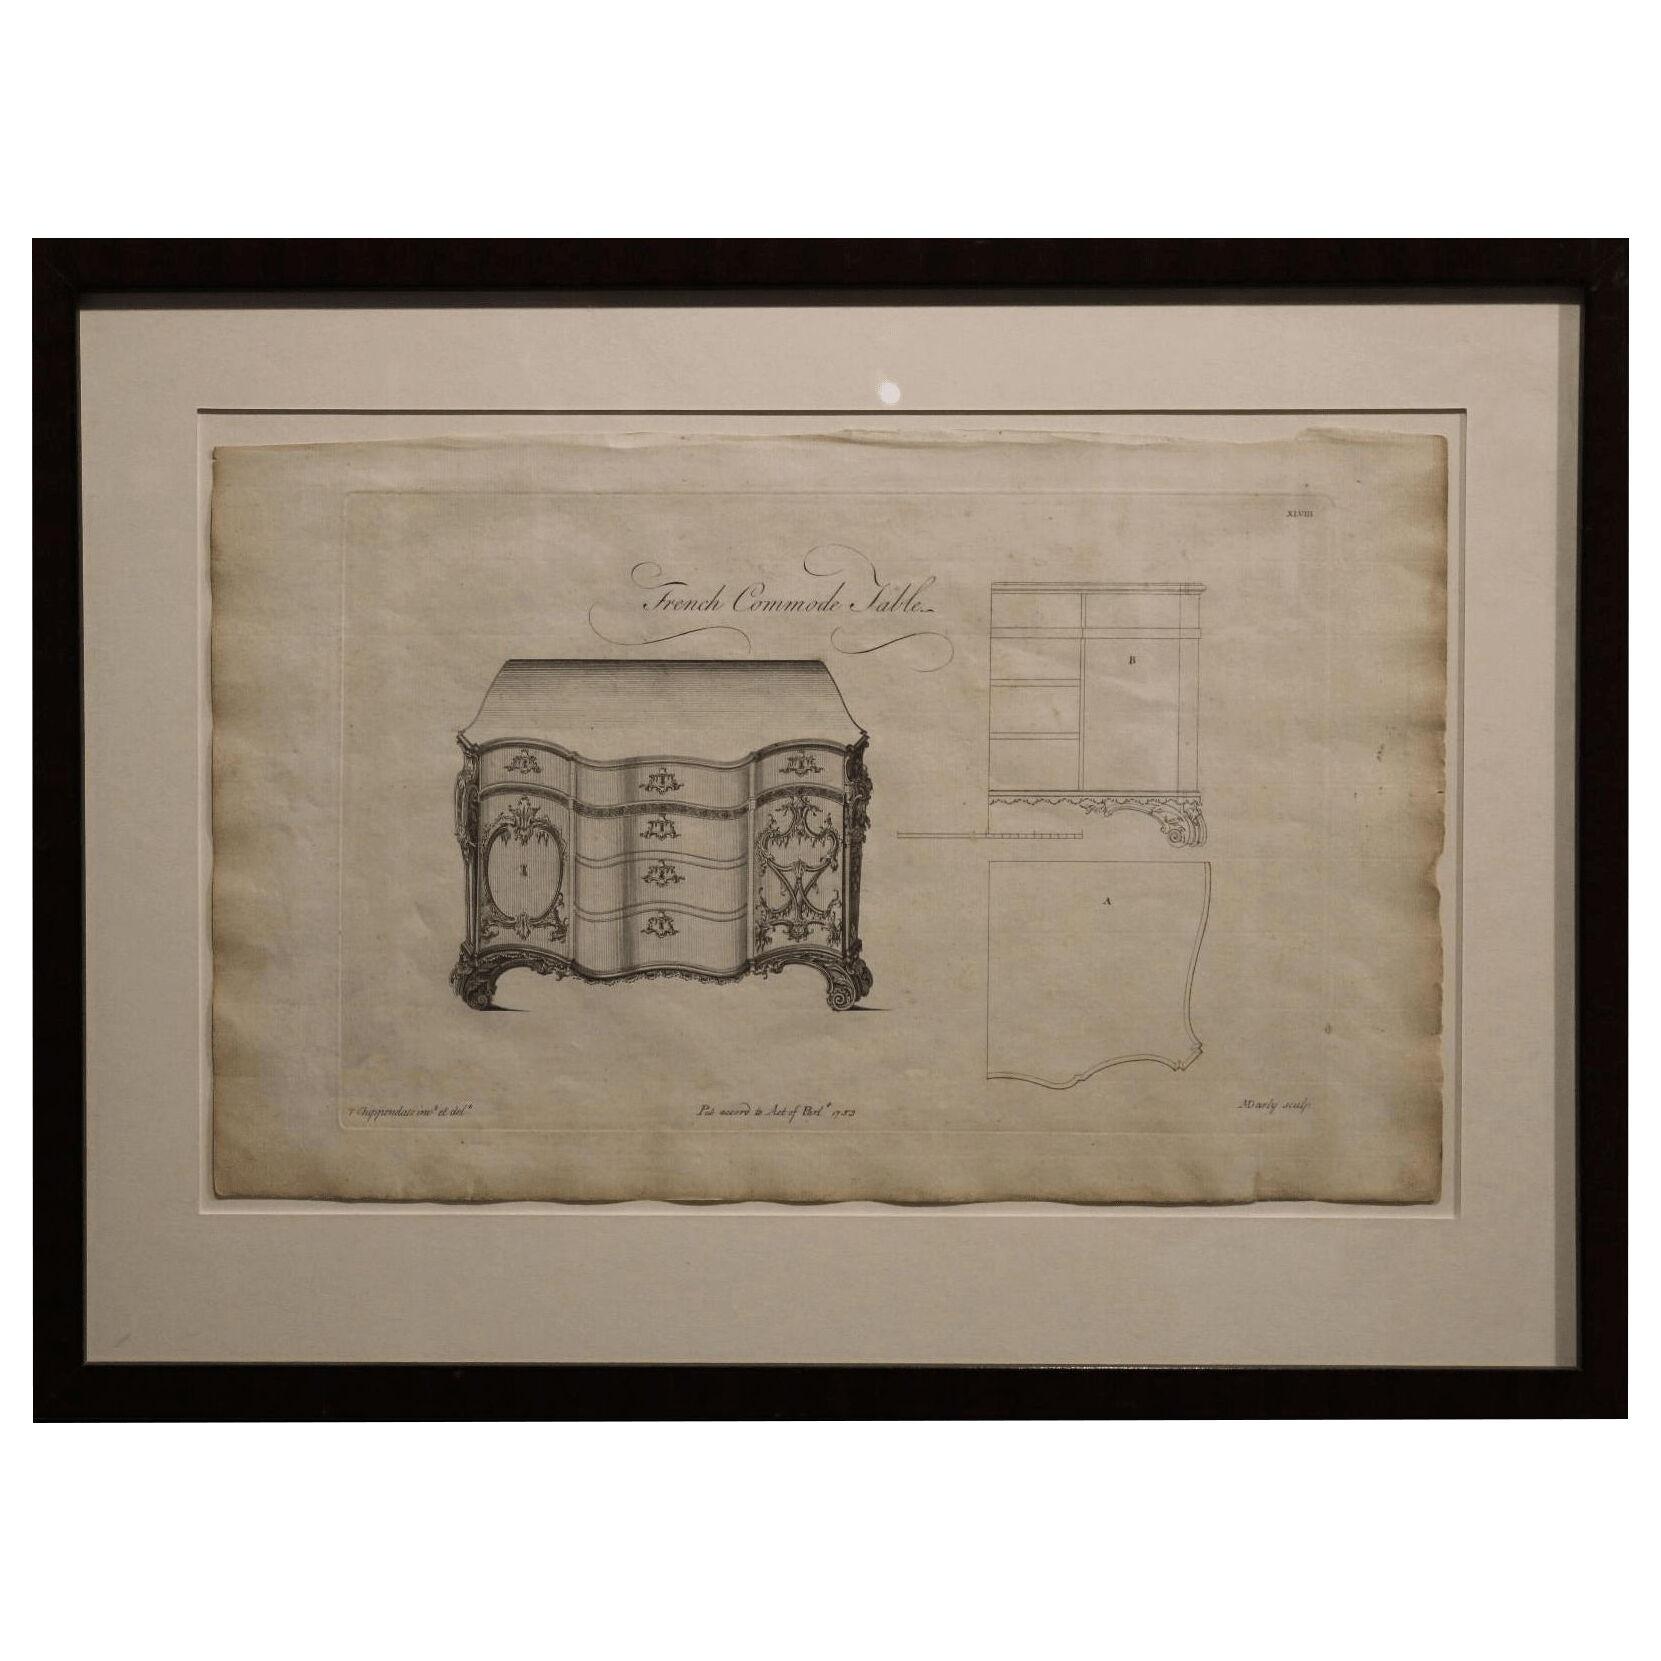 Mid 18 C. French Commode Table Etching "The Gentleman Cabinet-Maker's Director"